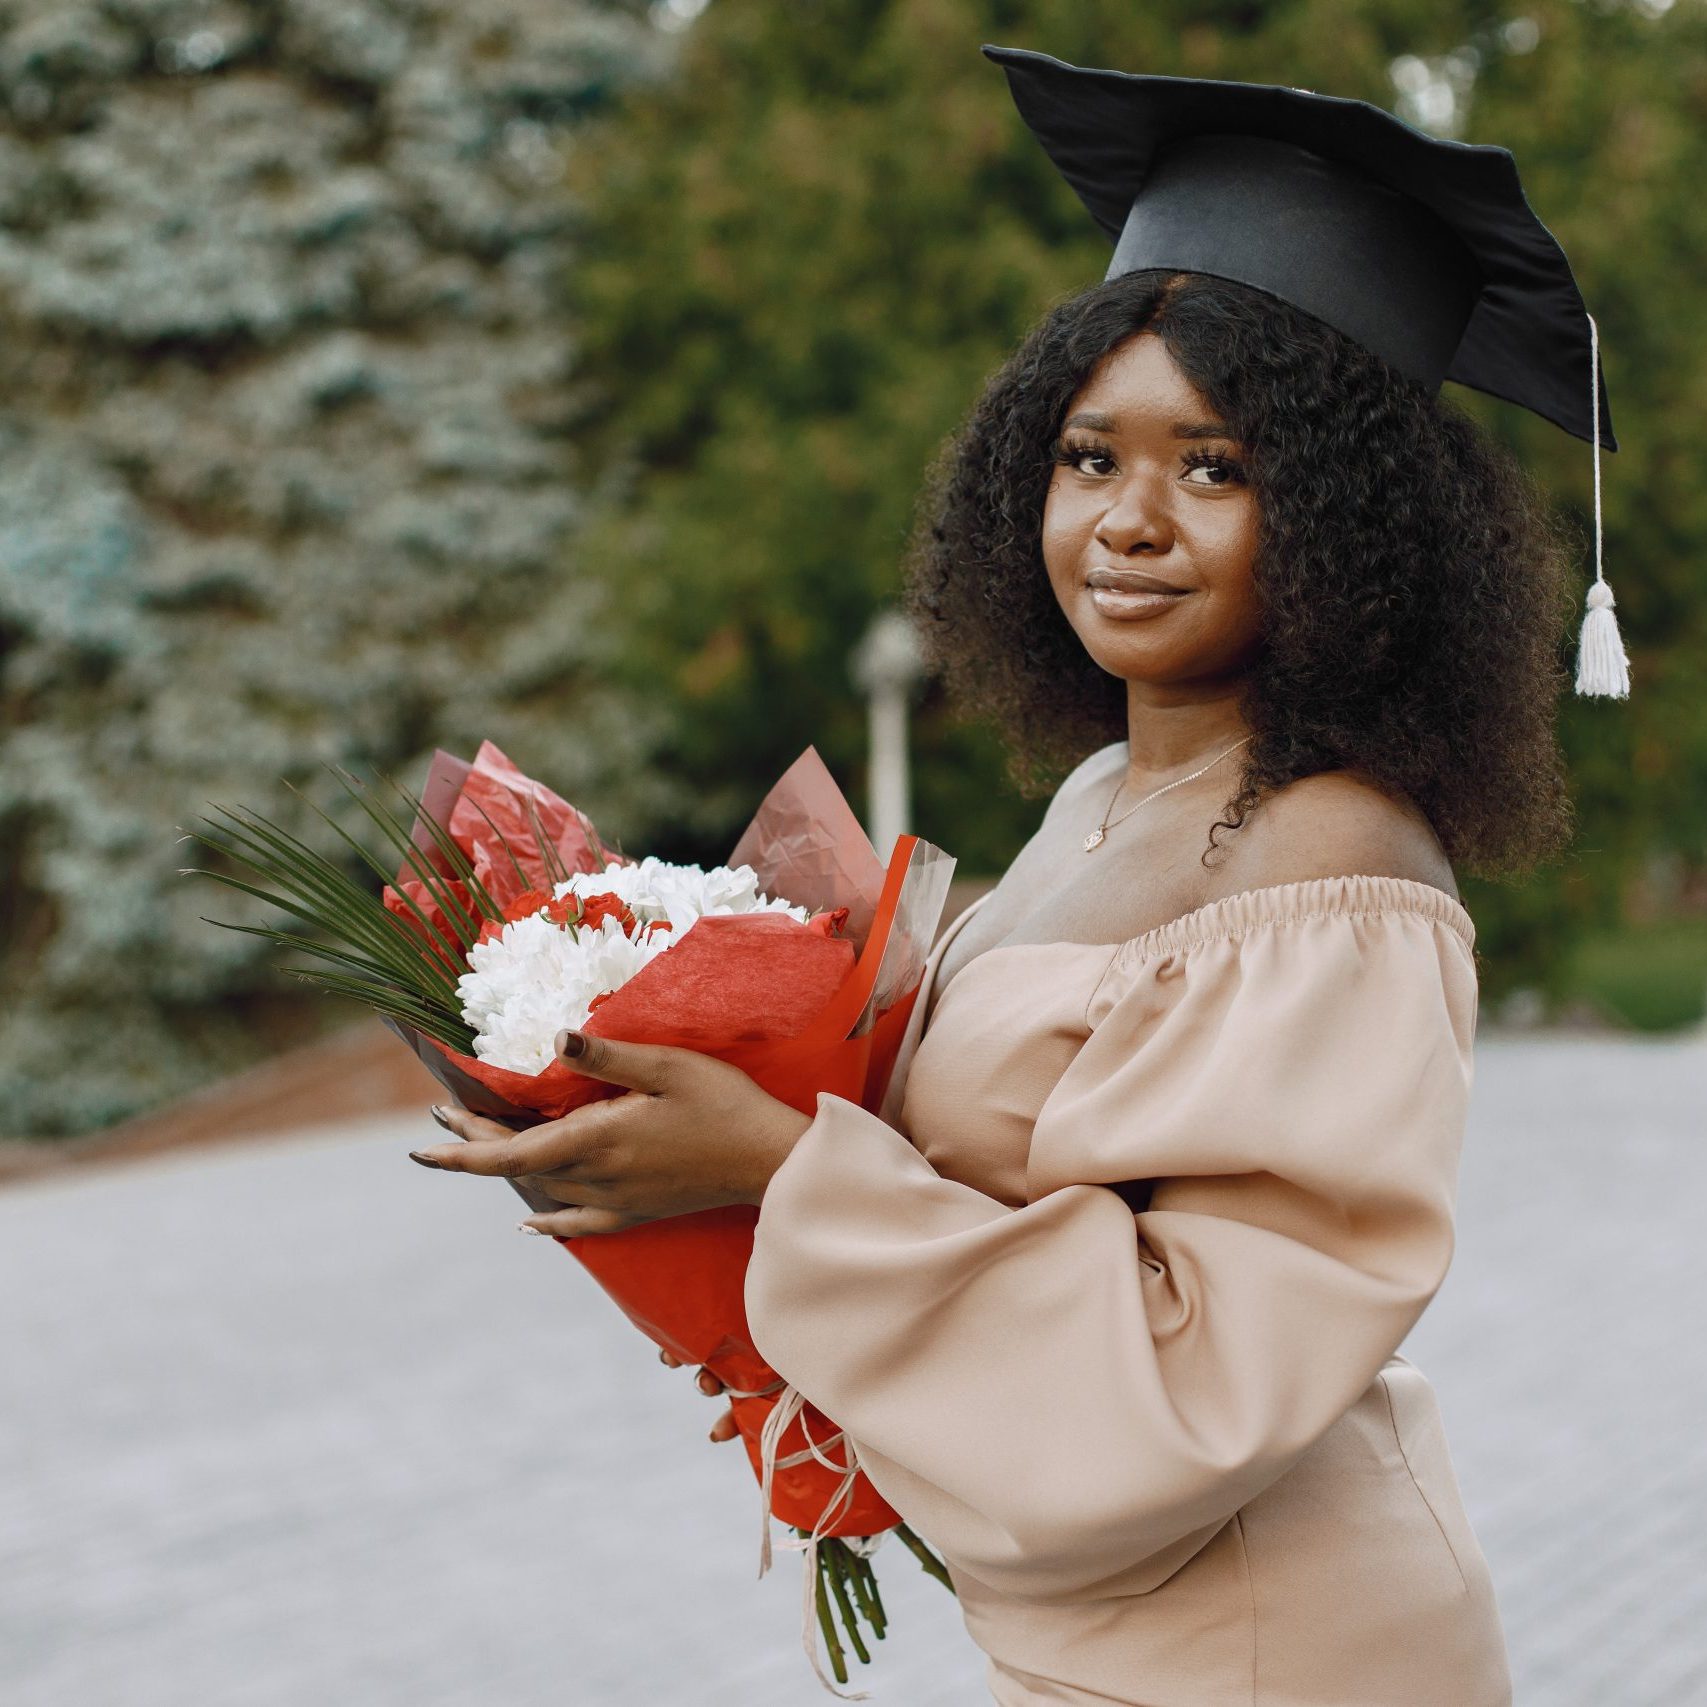 Young afro american female student dressed in beige dress and academic cap. Campus as a background. Girl posing for a photo and holding a flowers.